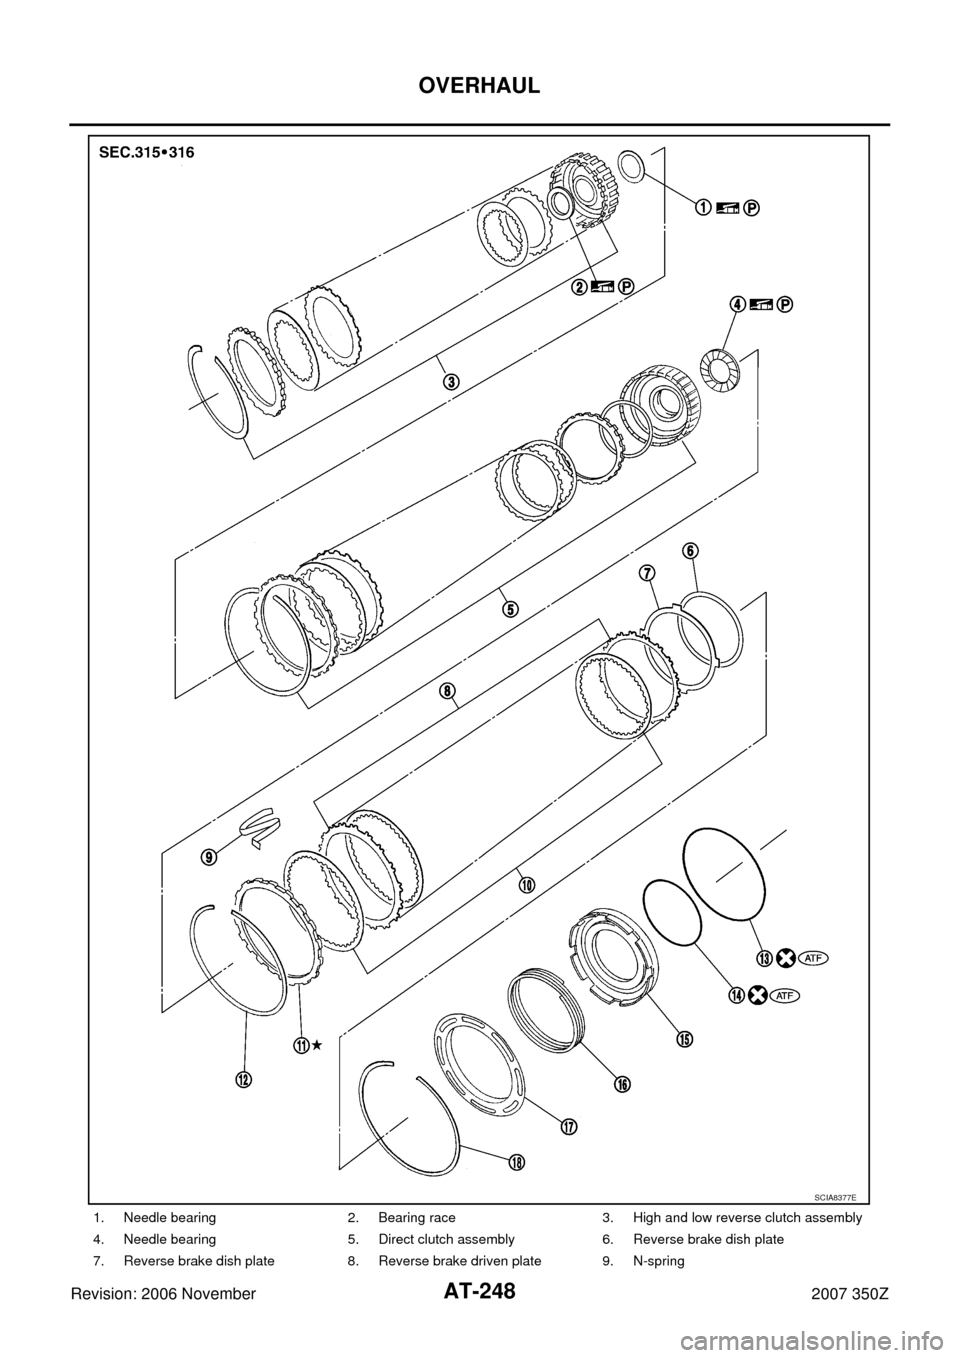 NISSAN 350Z 2007 Z33 Automatic Transmission Workshop Manual AT-248
OVERHAUL
Revision: 2006 November2007 350Z
1. Needle bearing 2. Bearing race 3. High and low reverse clutch assembly
4. Needle bearing 5. Direct clutch assembly 6. Reverse brake dish plate
7. Re